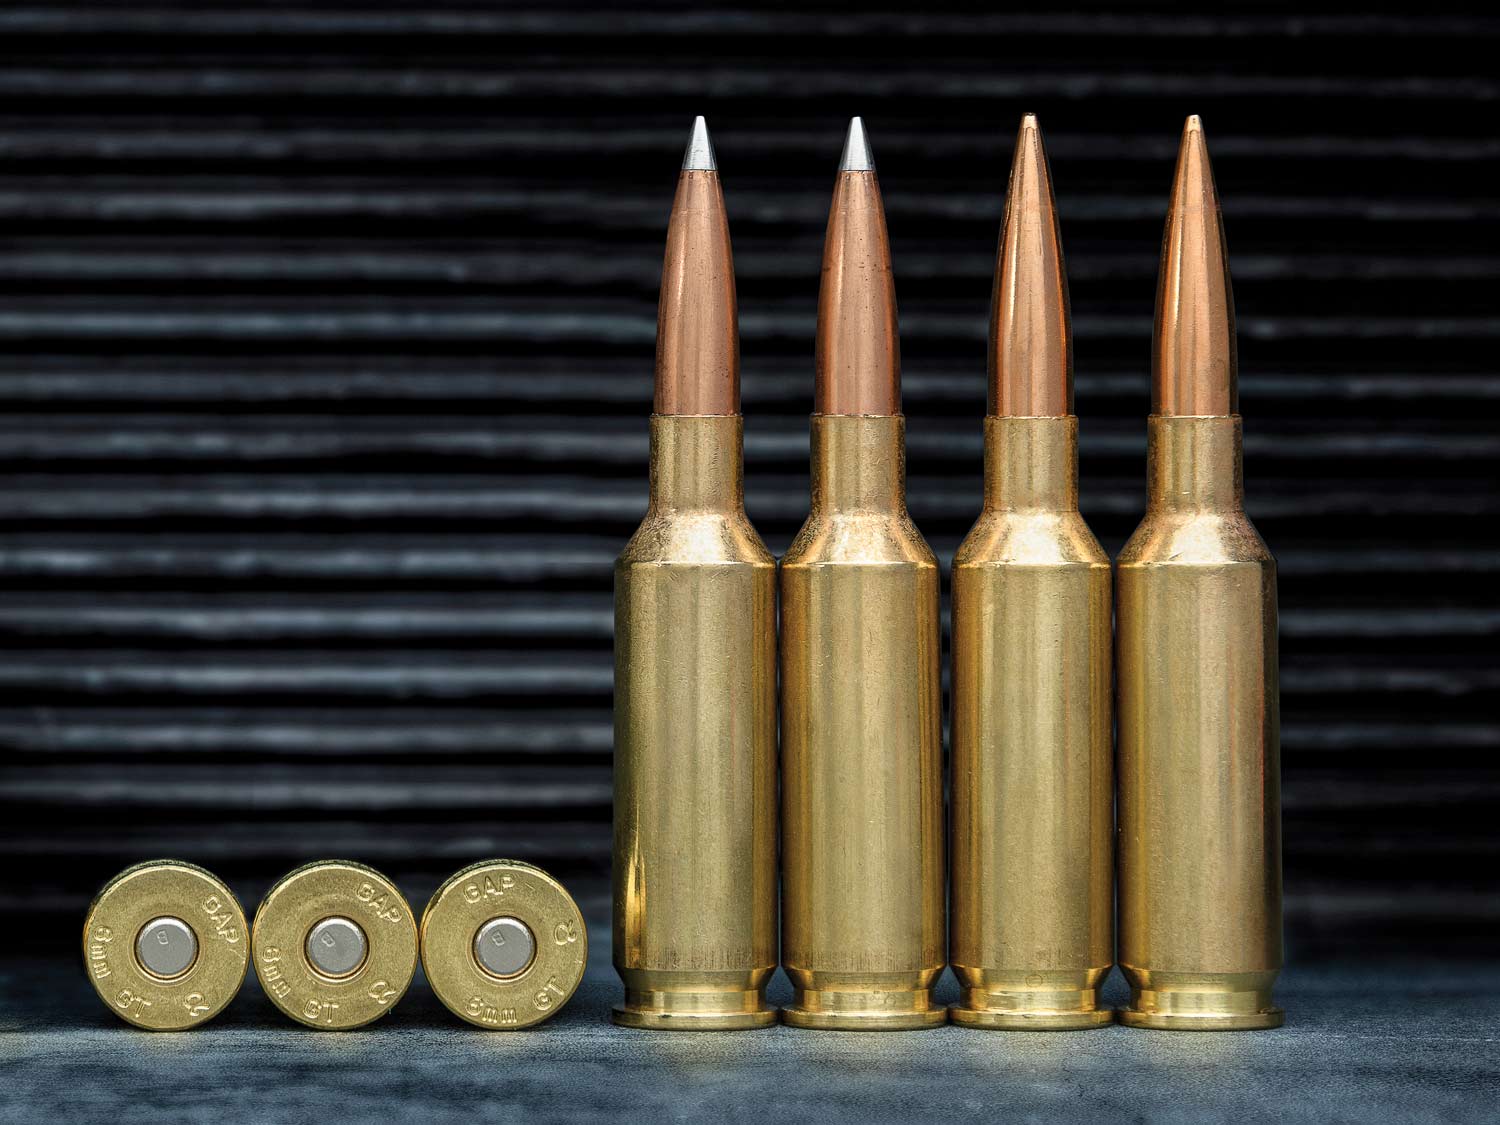 A lineup of rifle cartridges against a ridged black background.